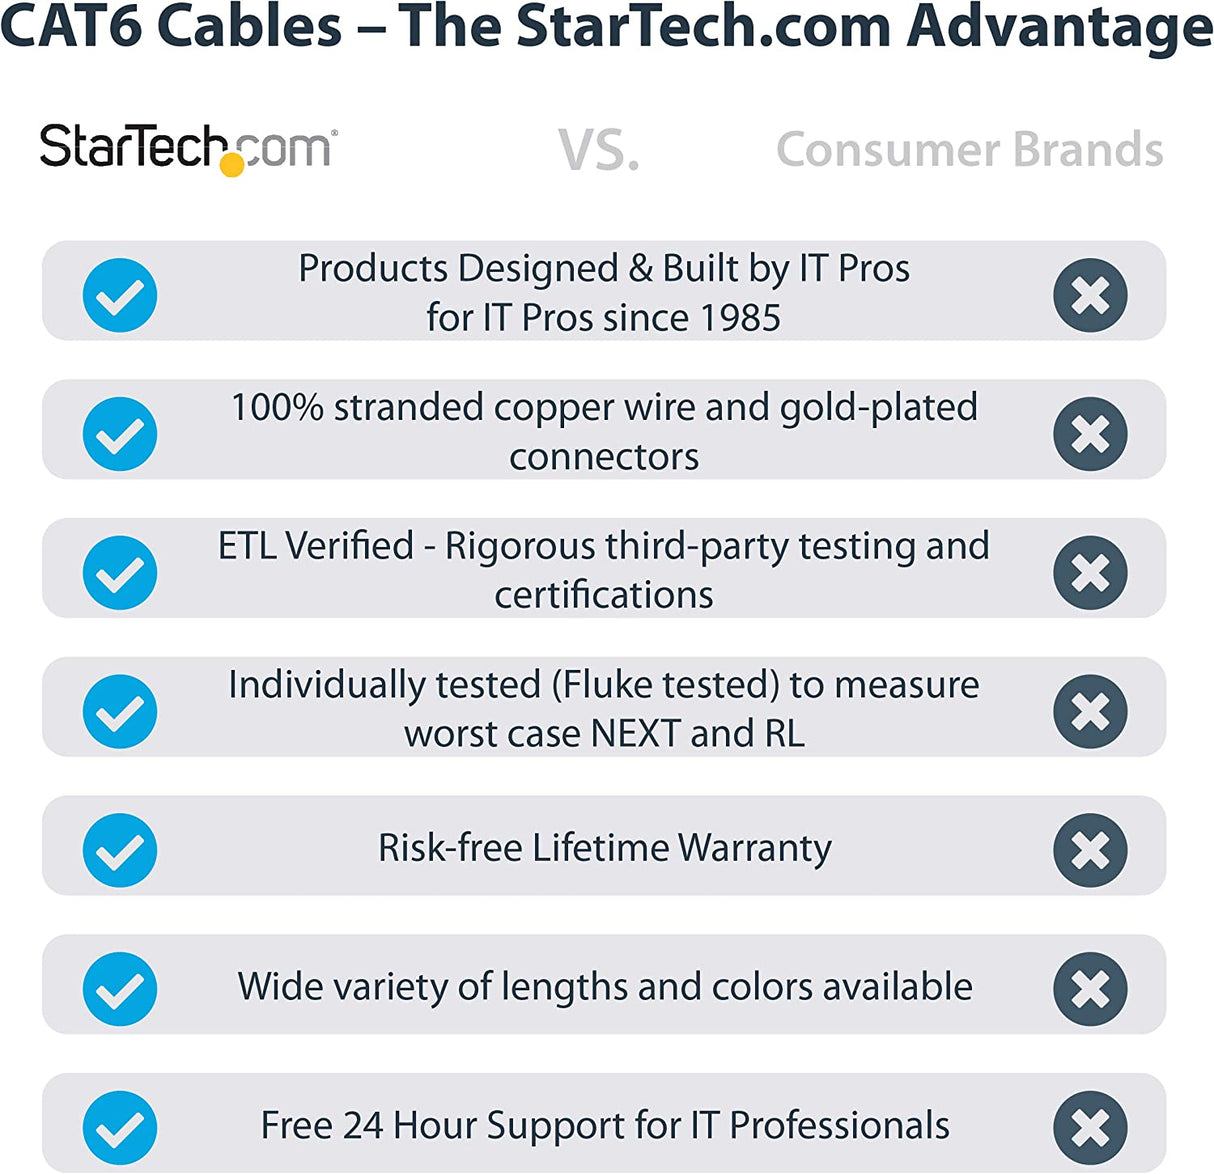 StarTech.com 10ft CAT6 Ethernet Cable - Purple CAT 6 Gigabit Ethernet Wire -650MHz 100W PoE++ RJ45 UTP Category 6 Network/Patch Cord Snagless w/Strain Relief Fluke Tested UL/TIA Certified (N6PATCH10PL) Purple 10 ft / 3m 1 Pack